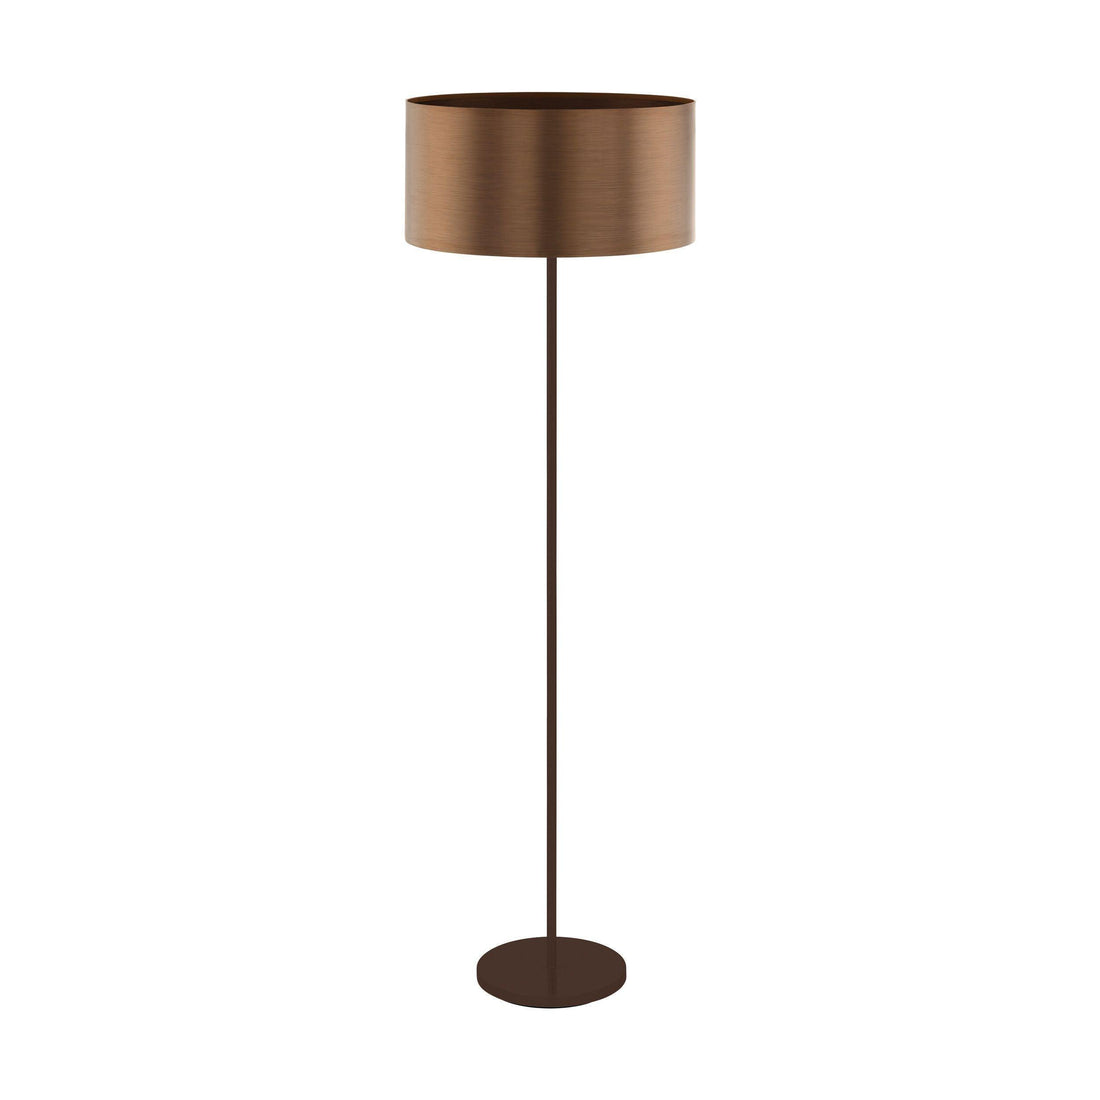 SAGANTO Floor Lamp by The Light Library